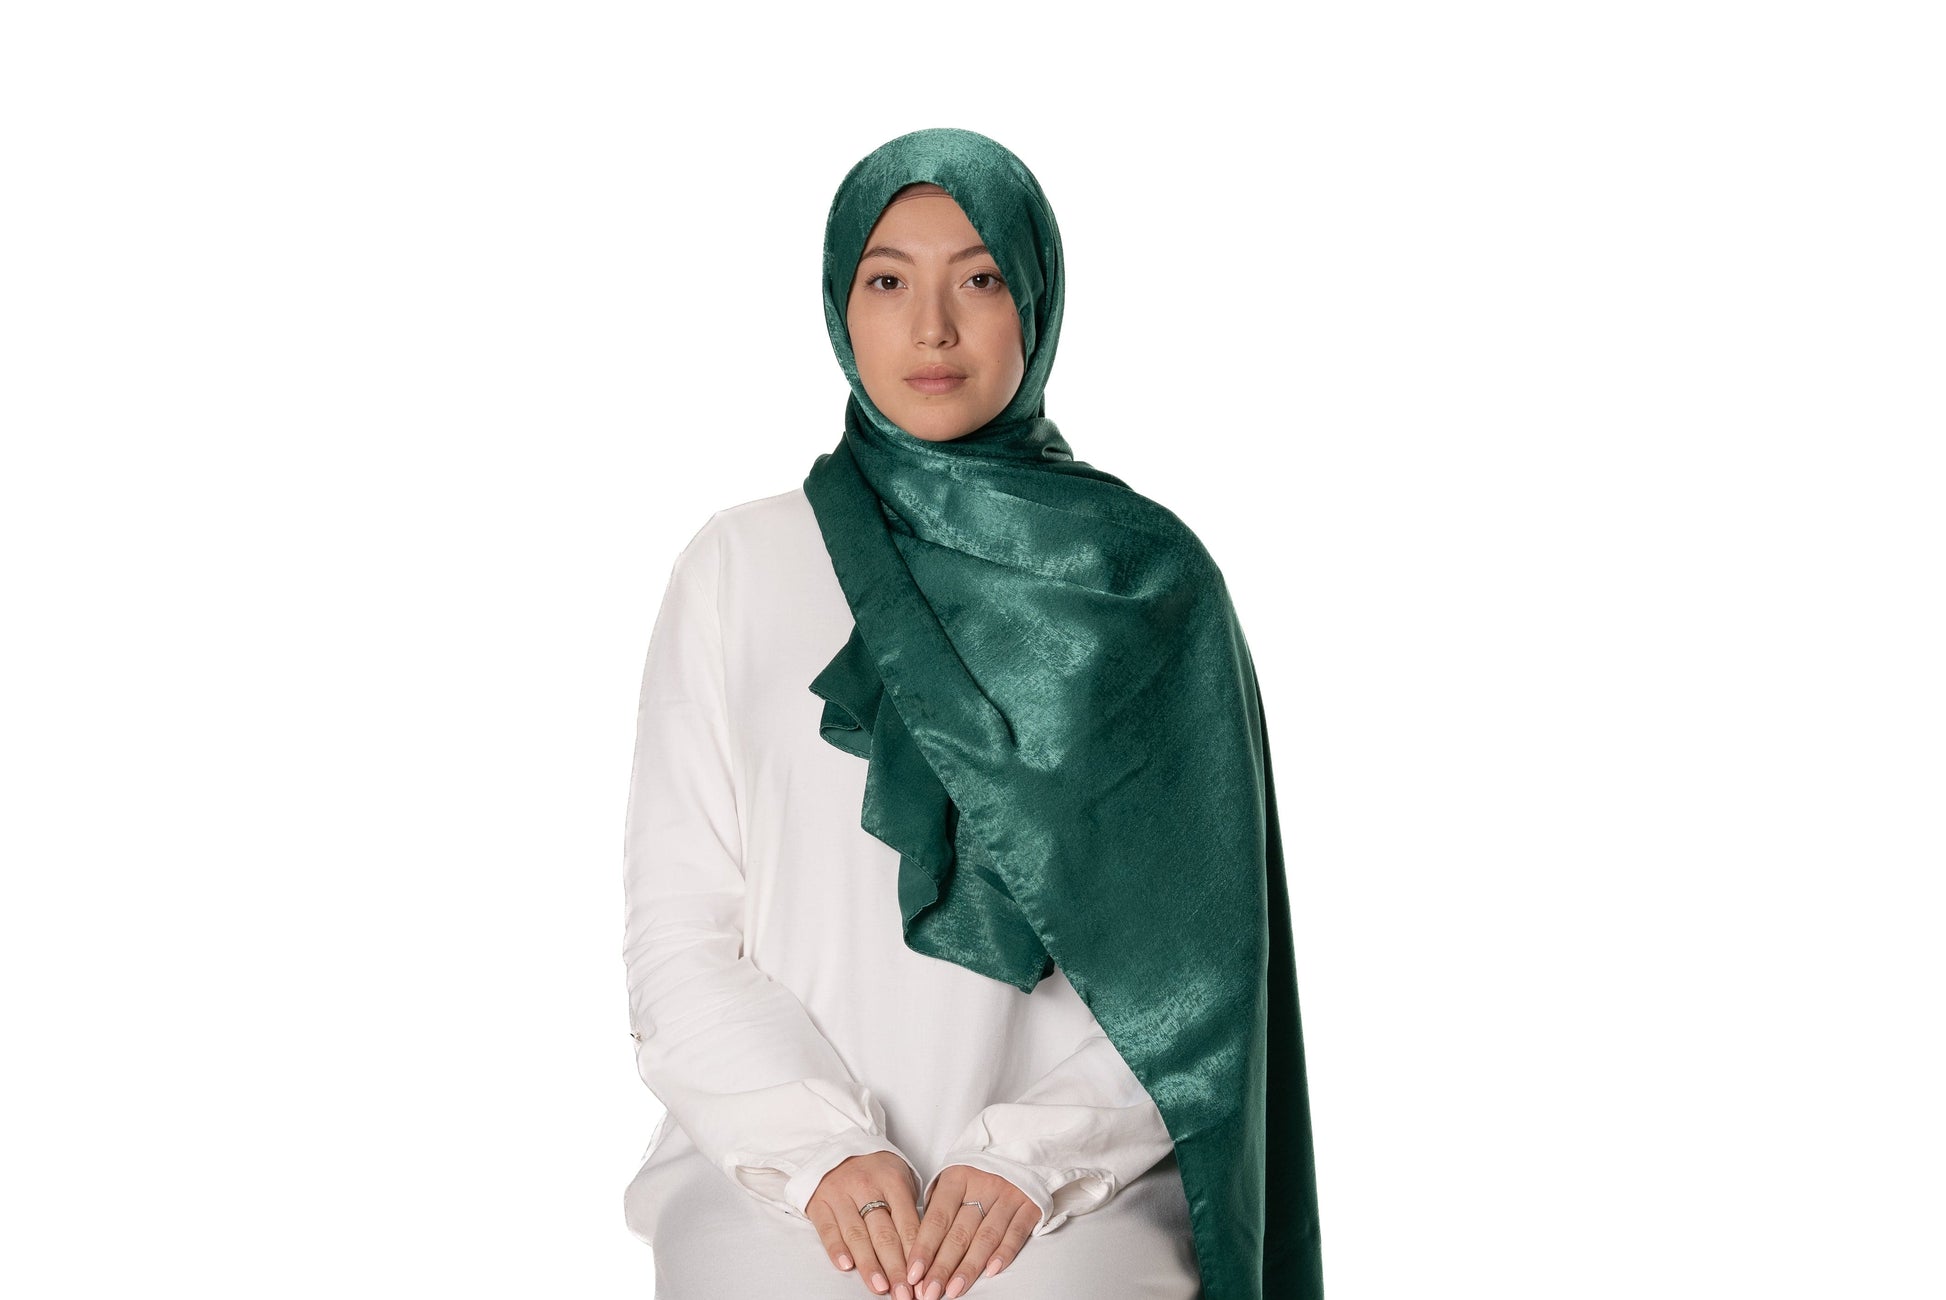 Jolie Nisa Hijab Forest Green Feel Luxurious and Elegant with Jolie Nisa Velvet Crushed Silk Satin Hijab - Maxi Size, Mid-Weight, Ripple Grain Texture Shop Jolie Nisa Velvet Crushed Silk Satin Hijab - Luxuriously Soft & Chic